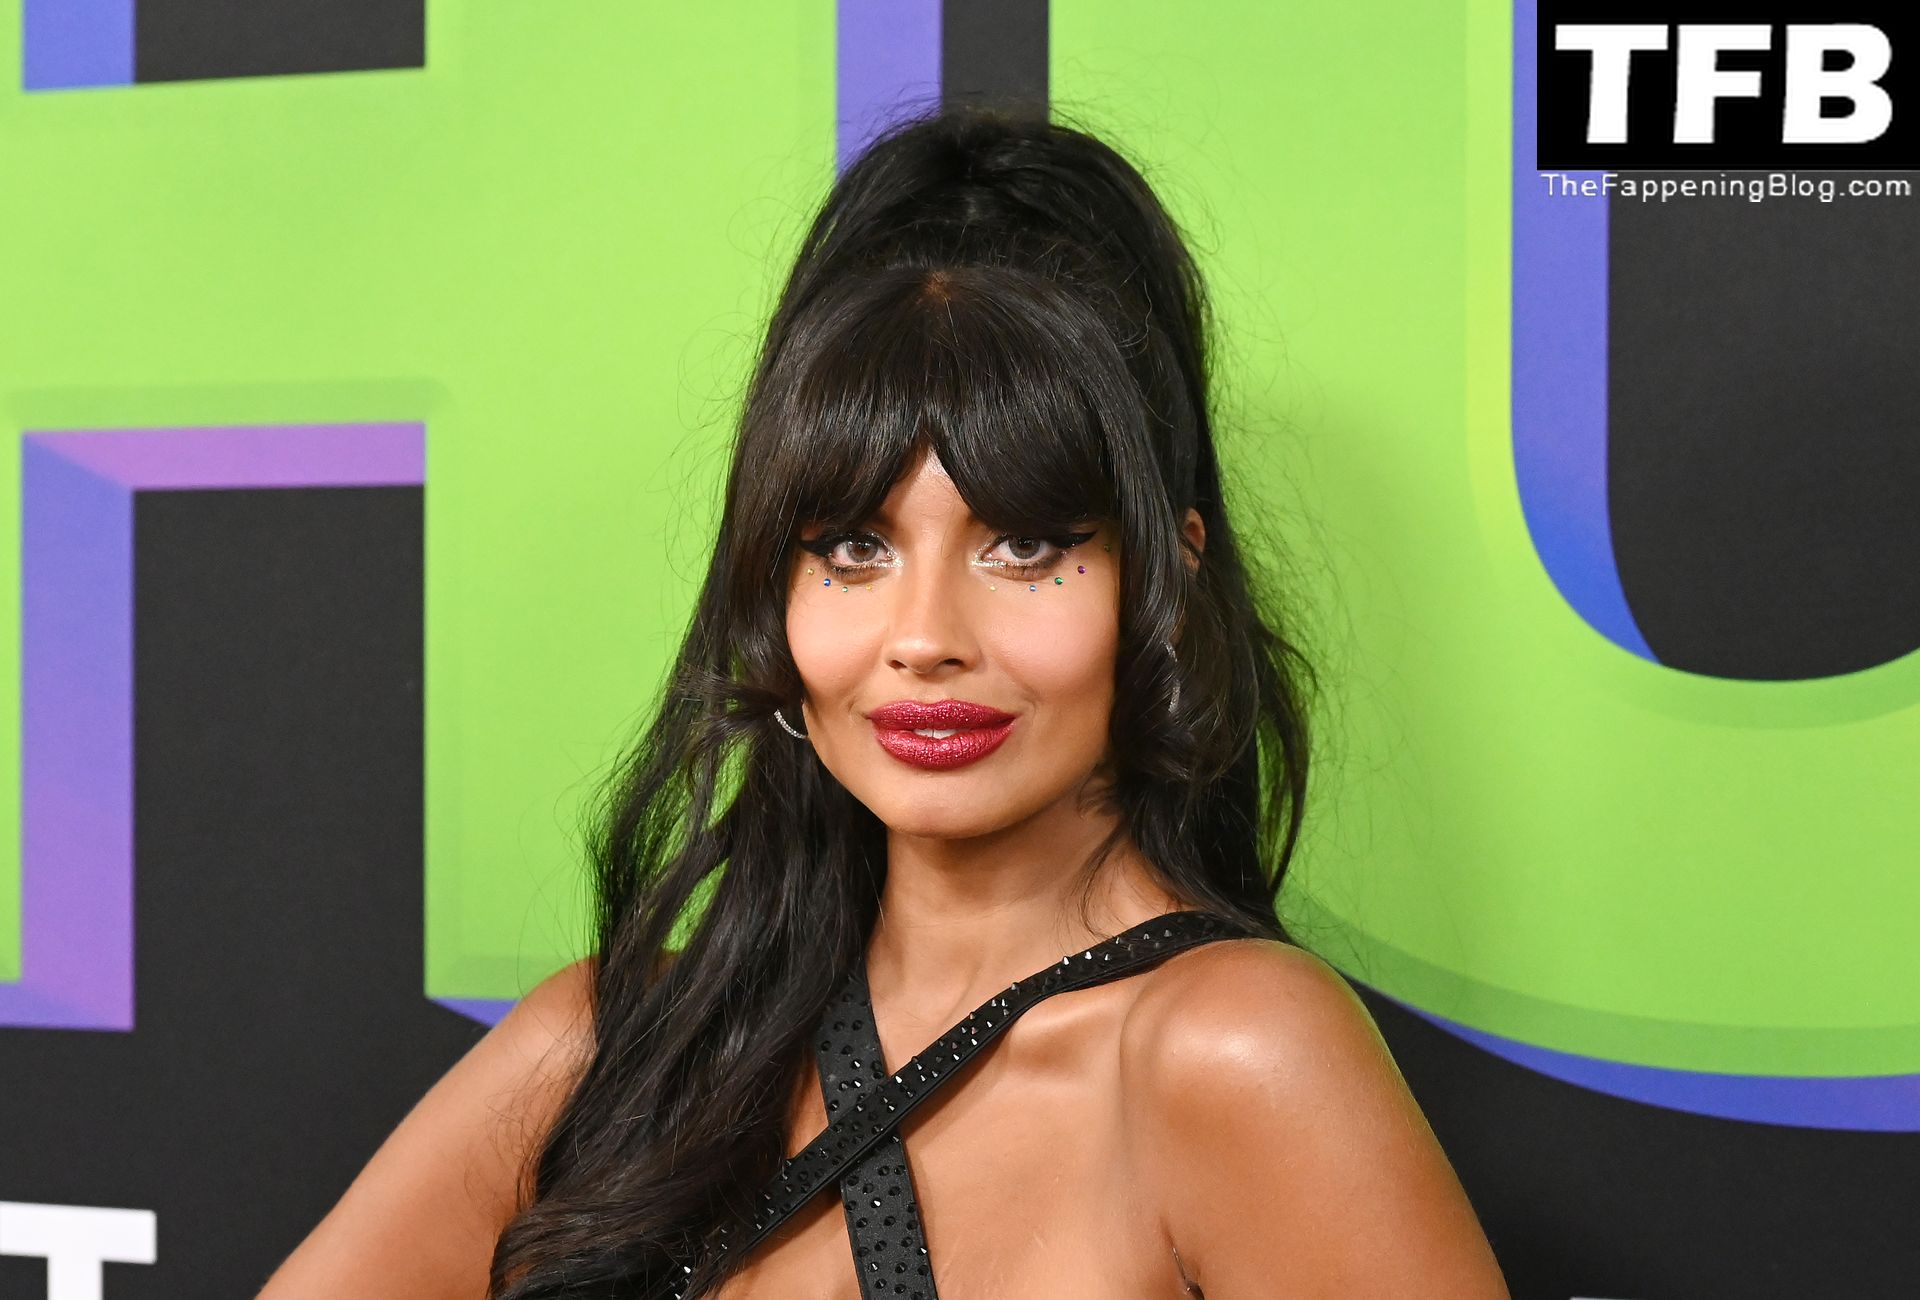 Jameela Jamil Sexy The Fappening Blog 39 - Jameela Jamil Flaunts Her Big Tits at the Premiere of Disney+’s “She Hulk: Attorney at Law” in LA (53 Photos)